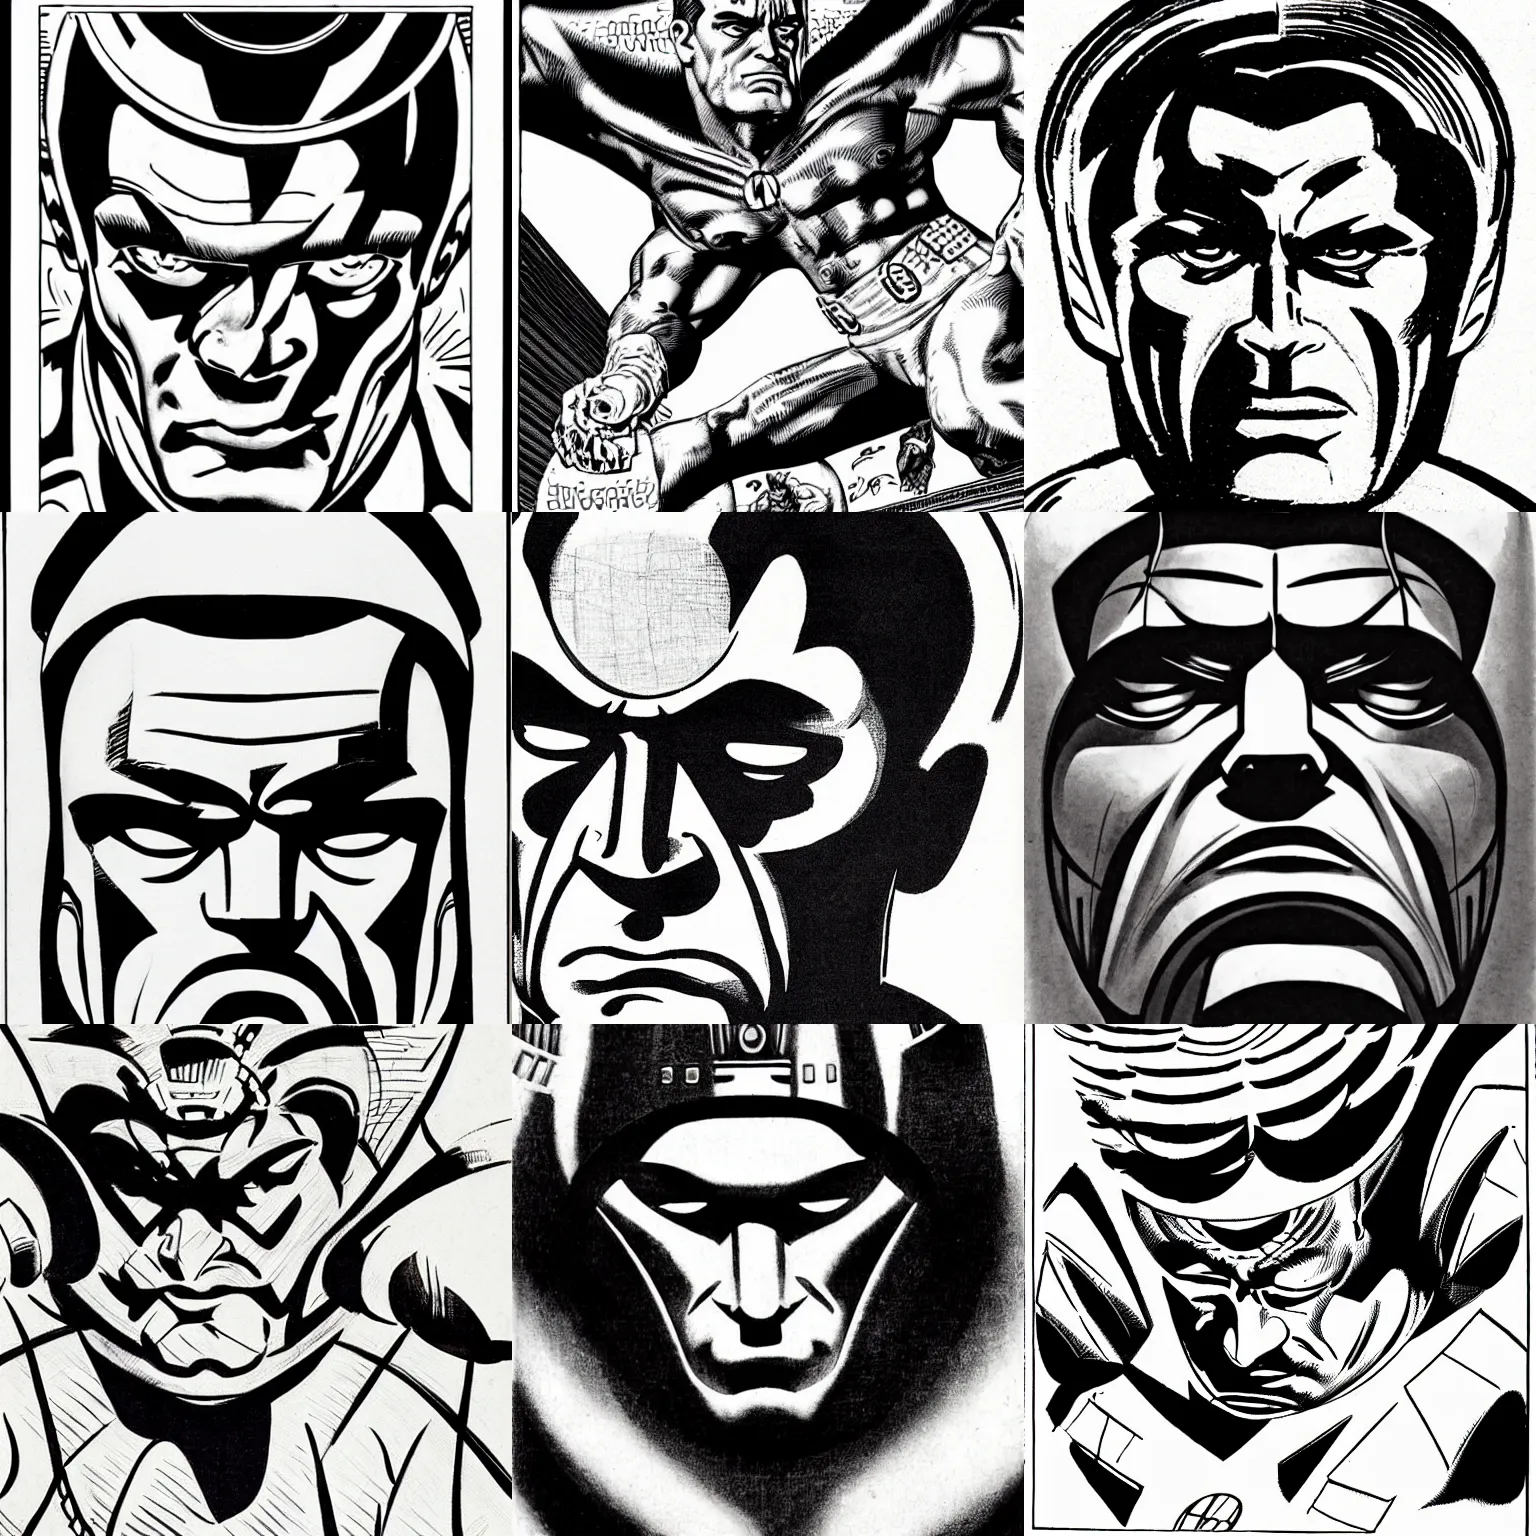 Prompt: by jack kirby : macro face of male